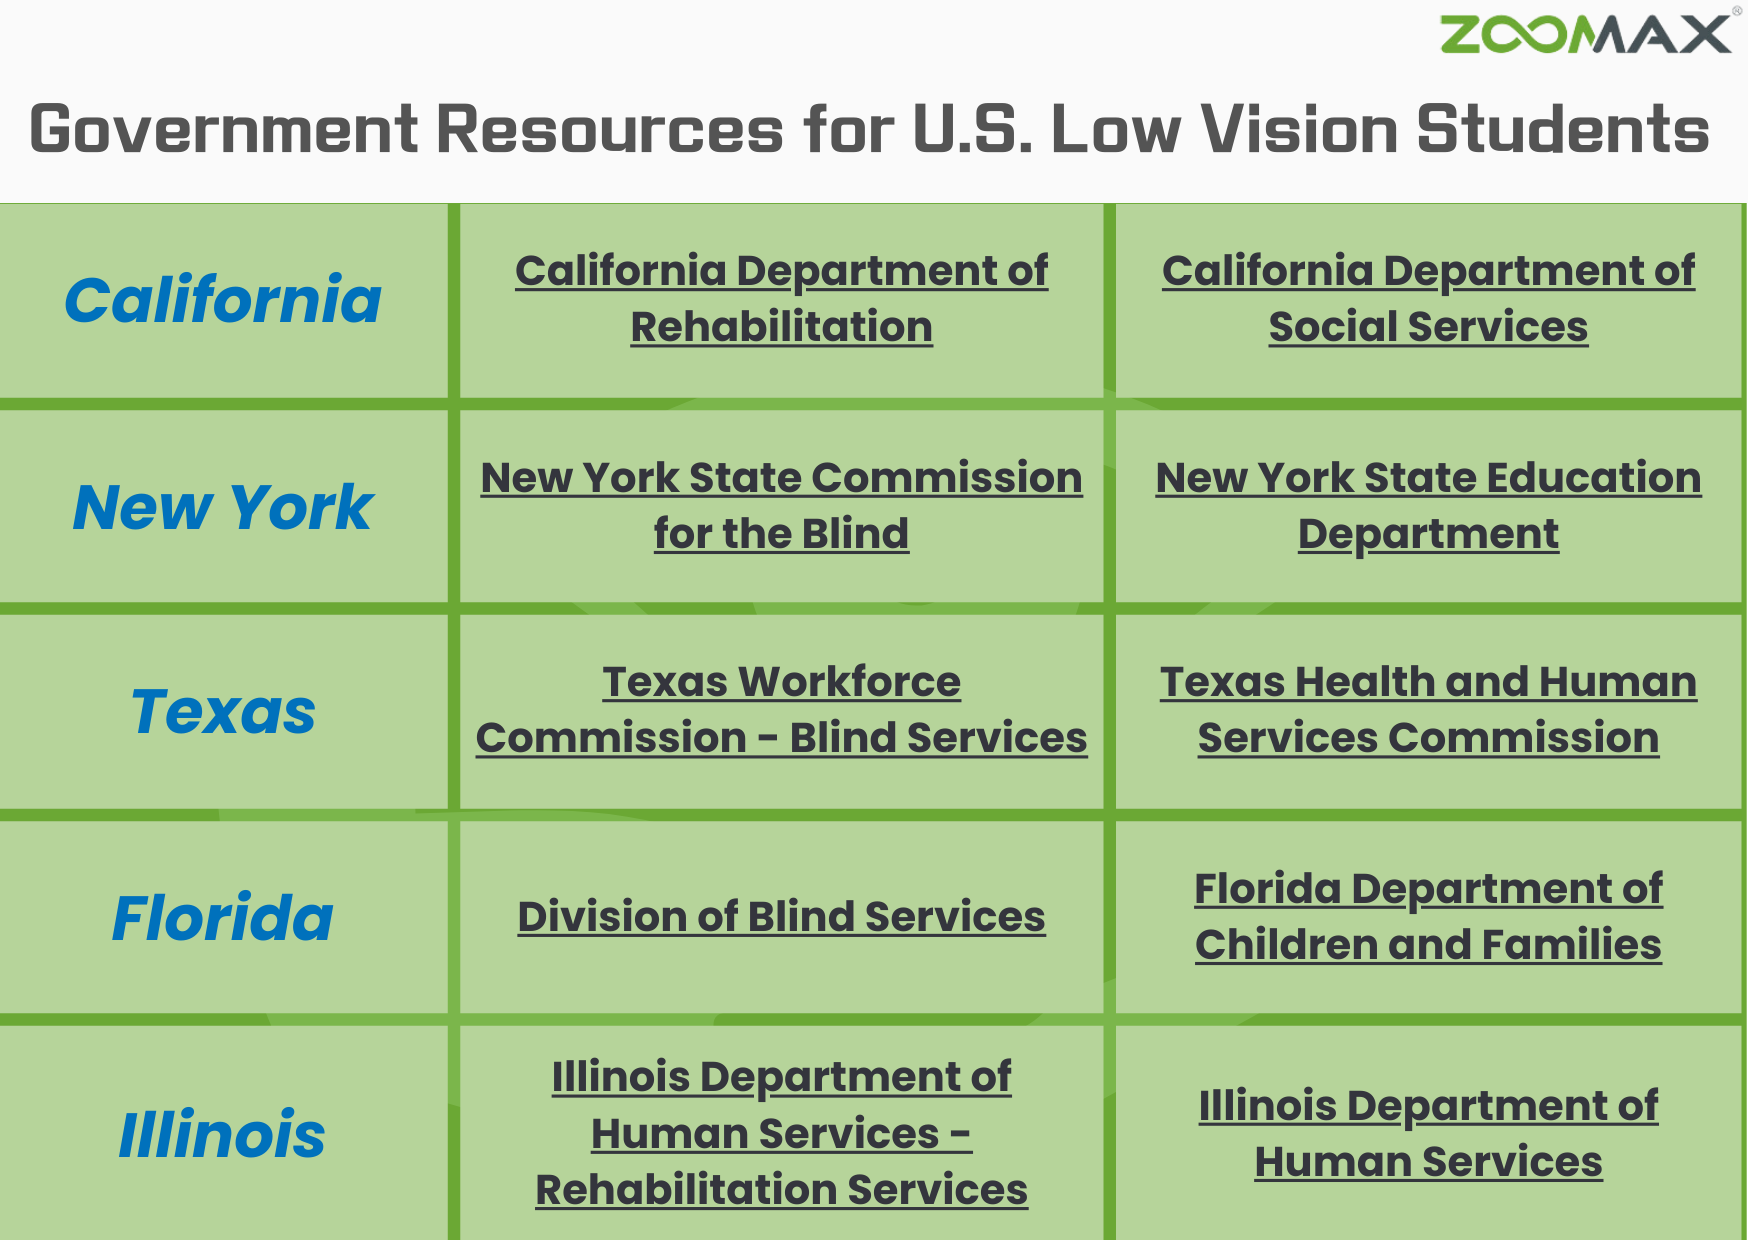 government resources for u.s. low vision students